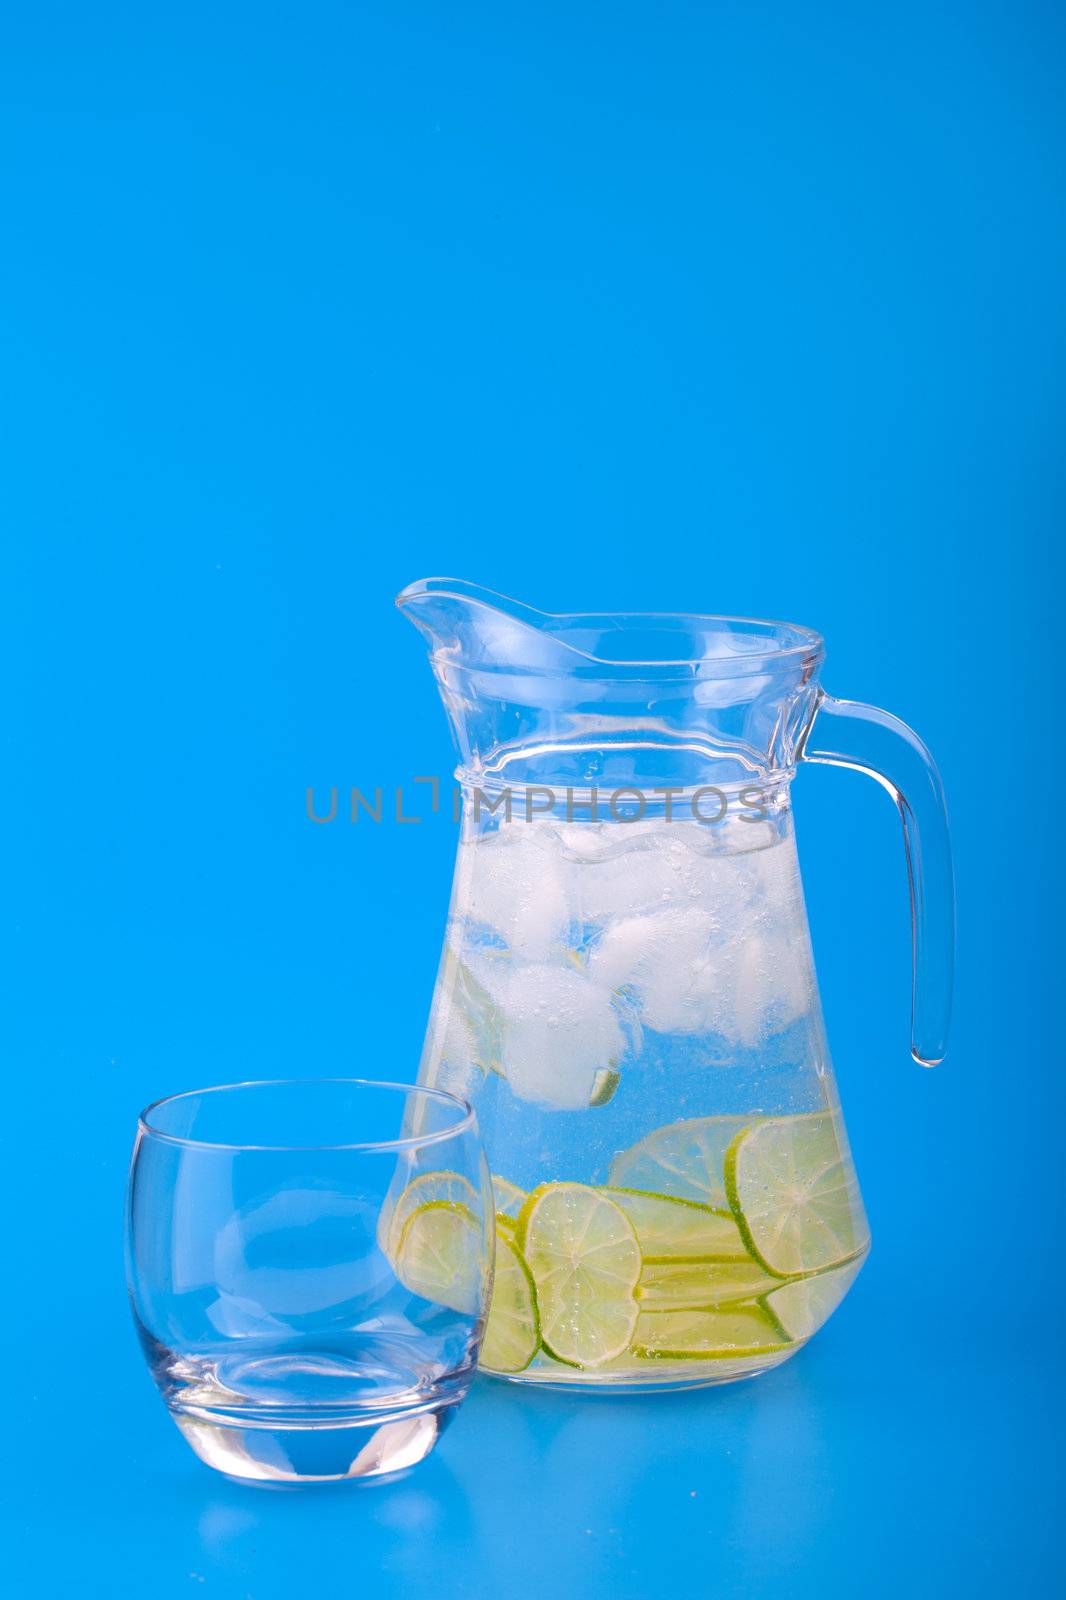 Lemonade Pitcher with ice on blue background by motorolka